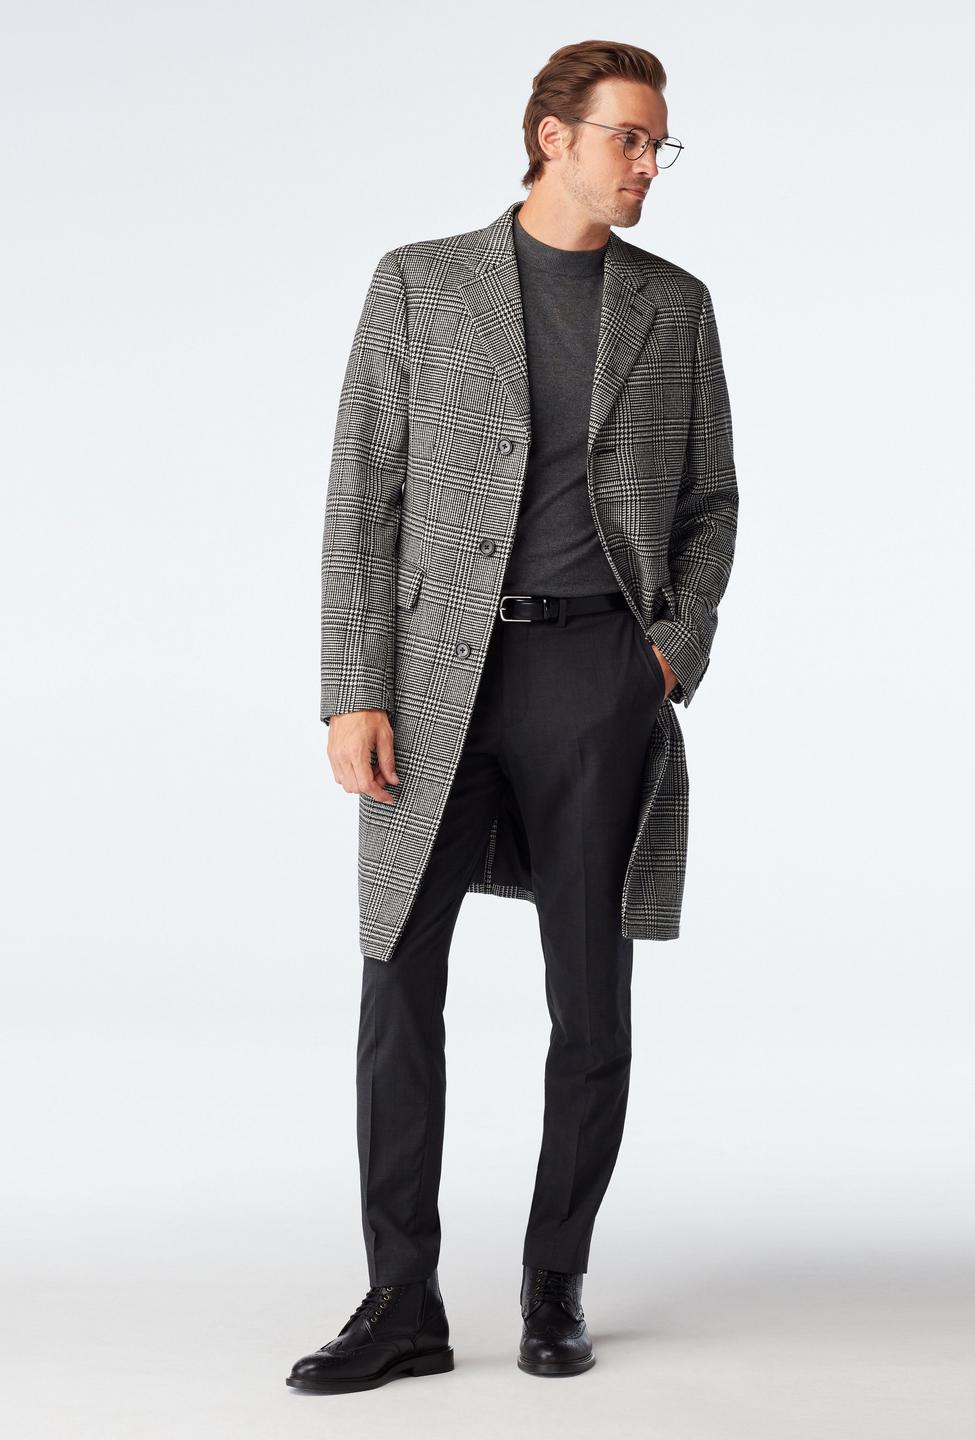 Heartford Houndstooth Black and White Overcoat